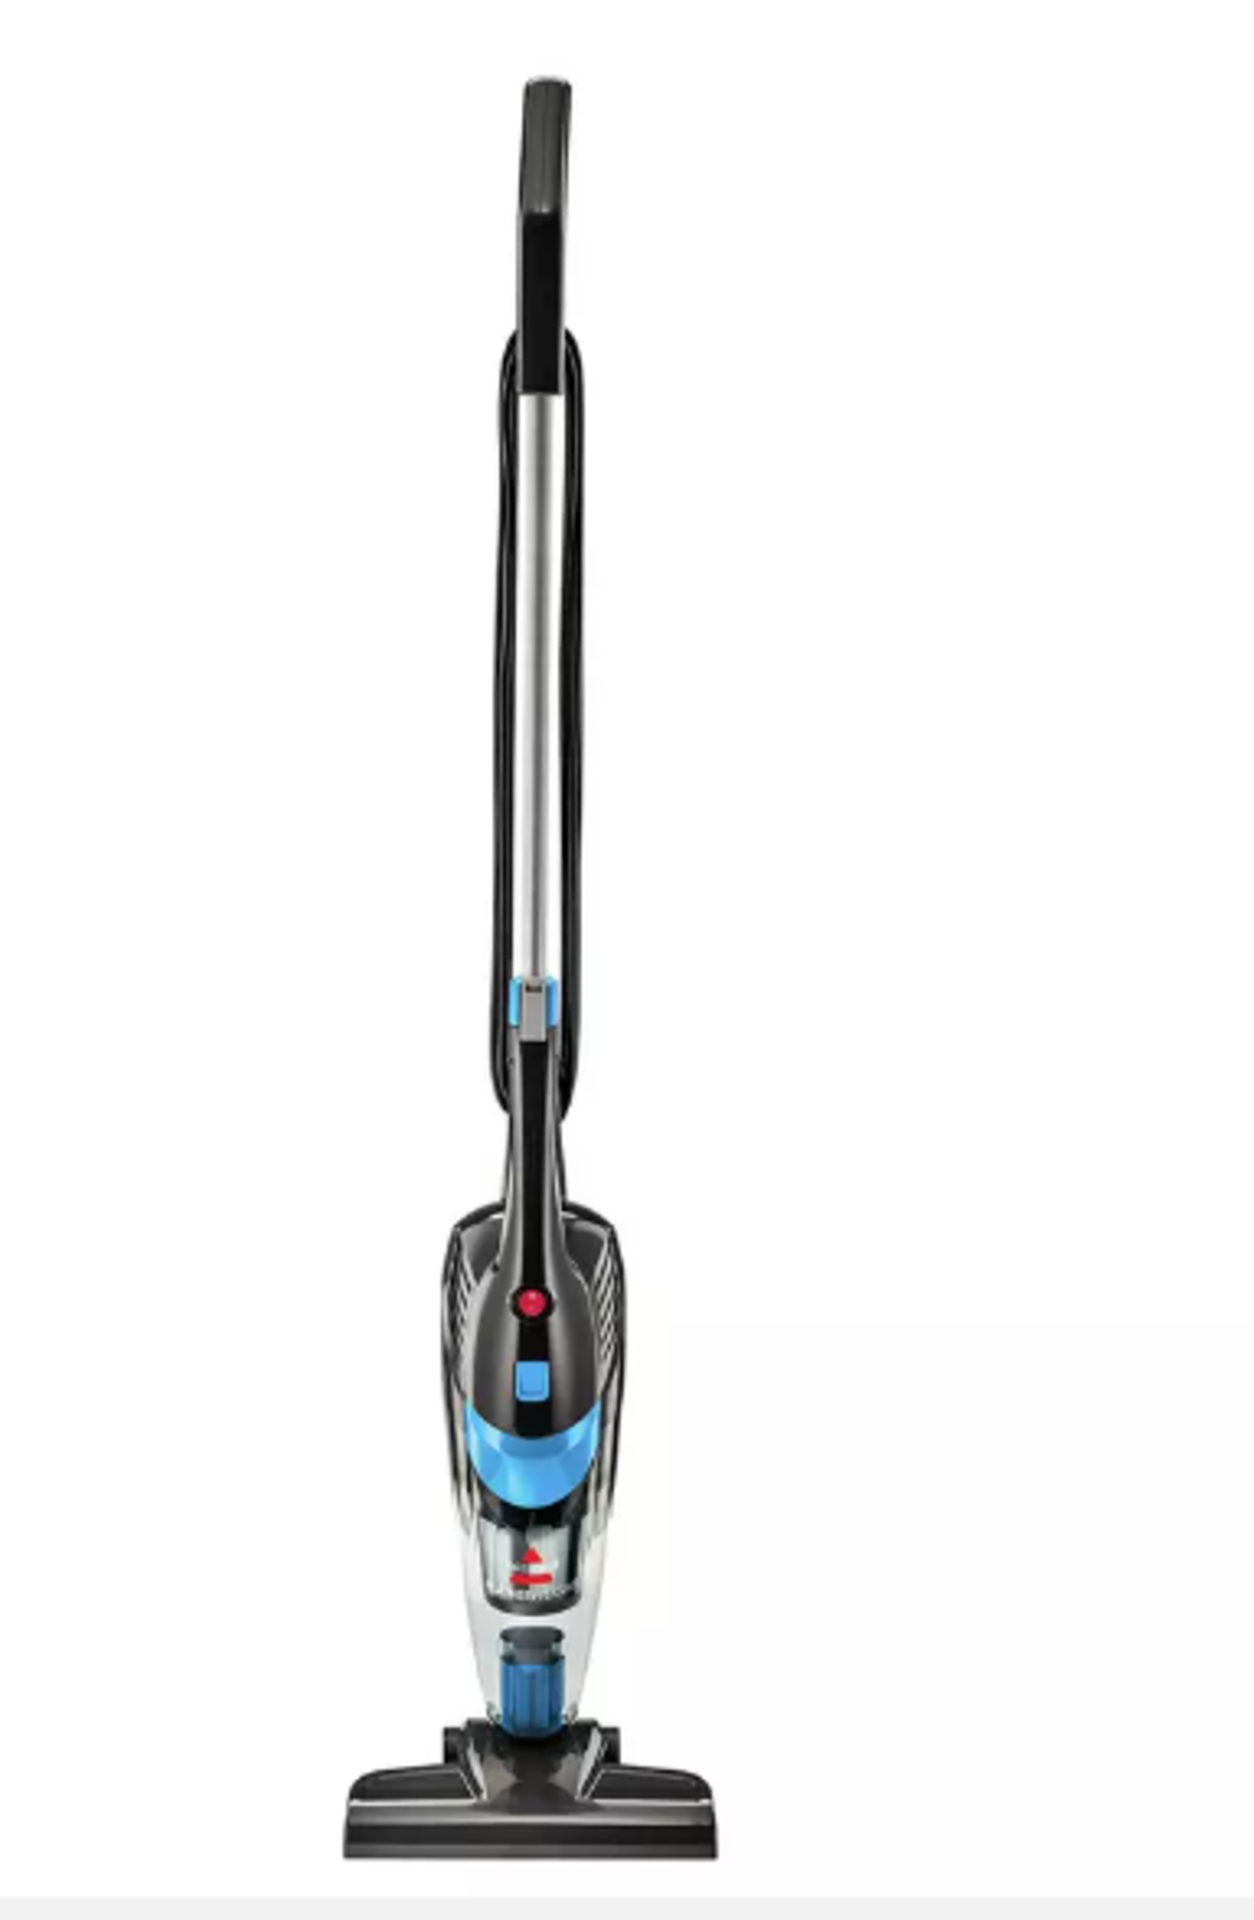 Bissell Featherweight Corded Bagless Upright Vacuum Cleaner. RRP £75.00. - EBR. *BOXED* A 2-in-1